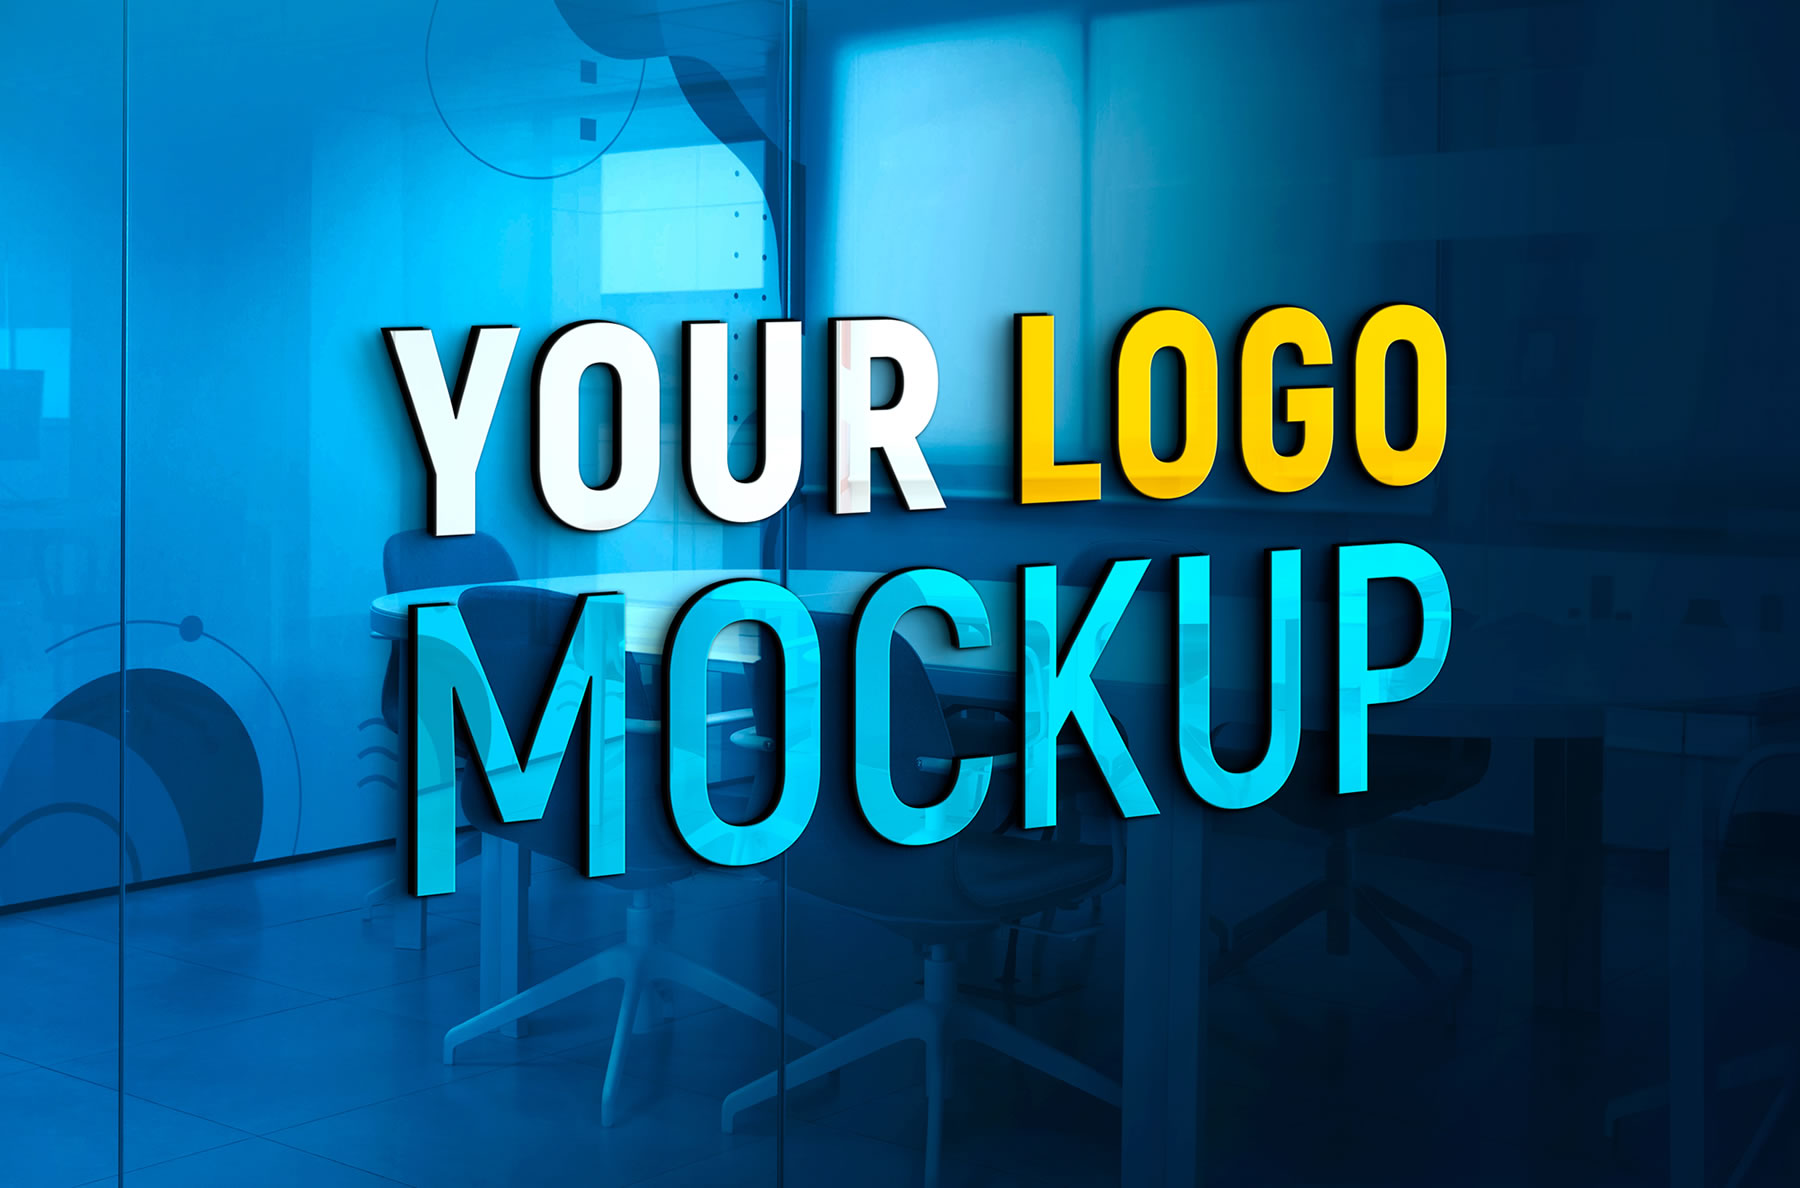 Free PSD Graphic Design Logo Template – GraphicsFamily